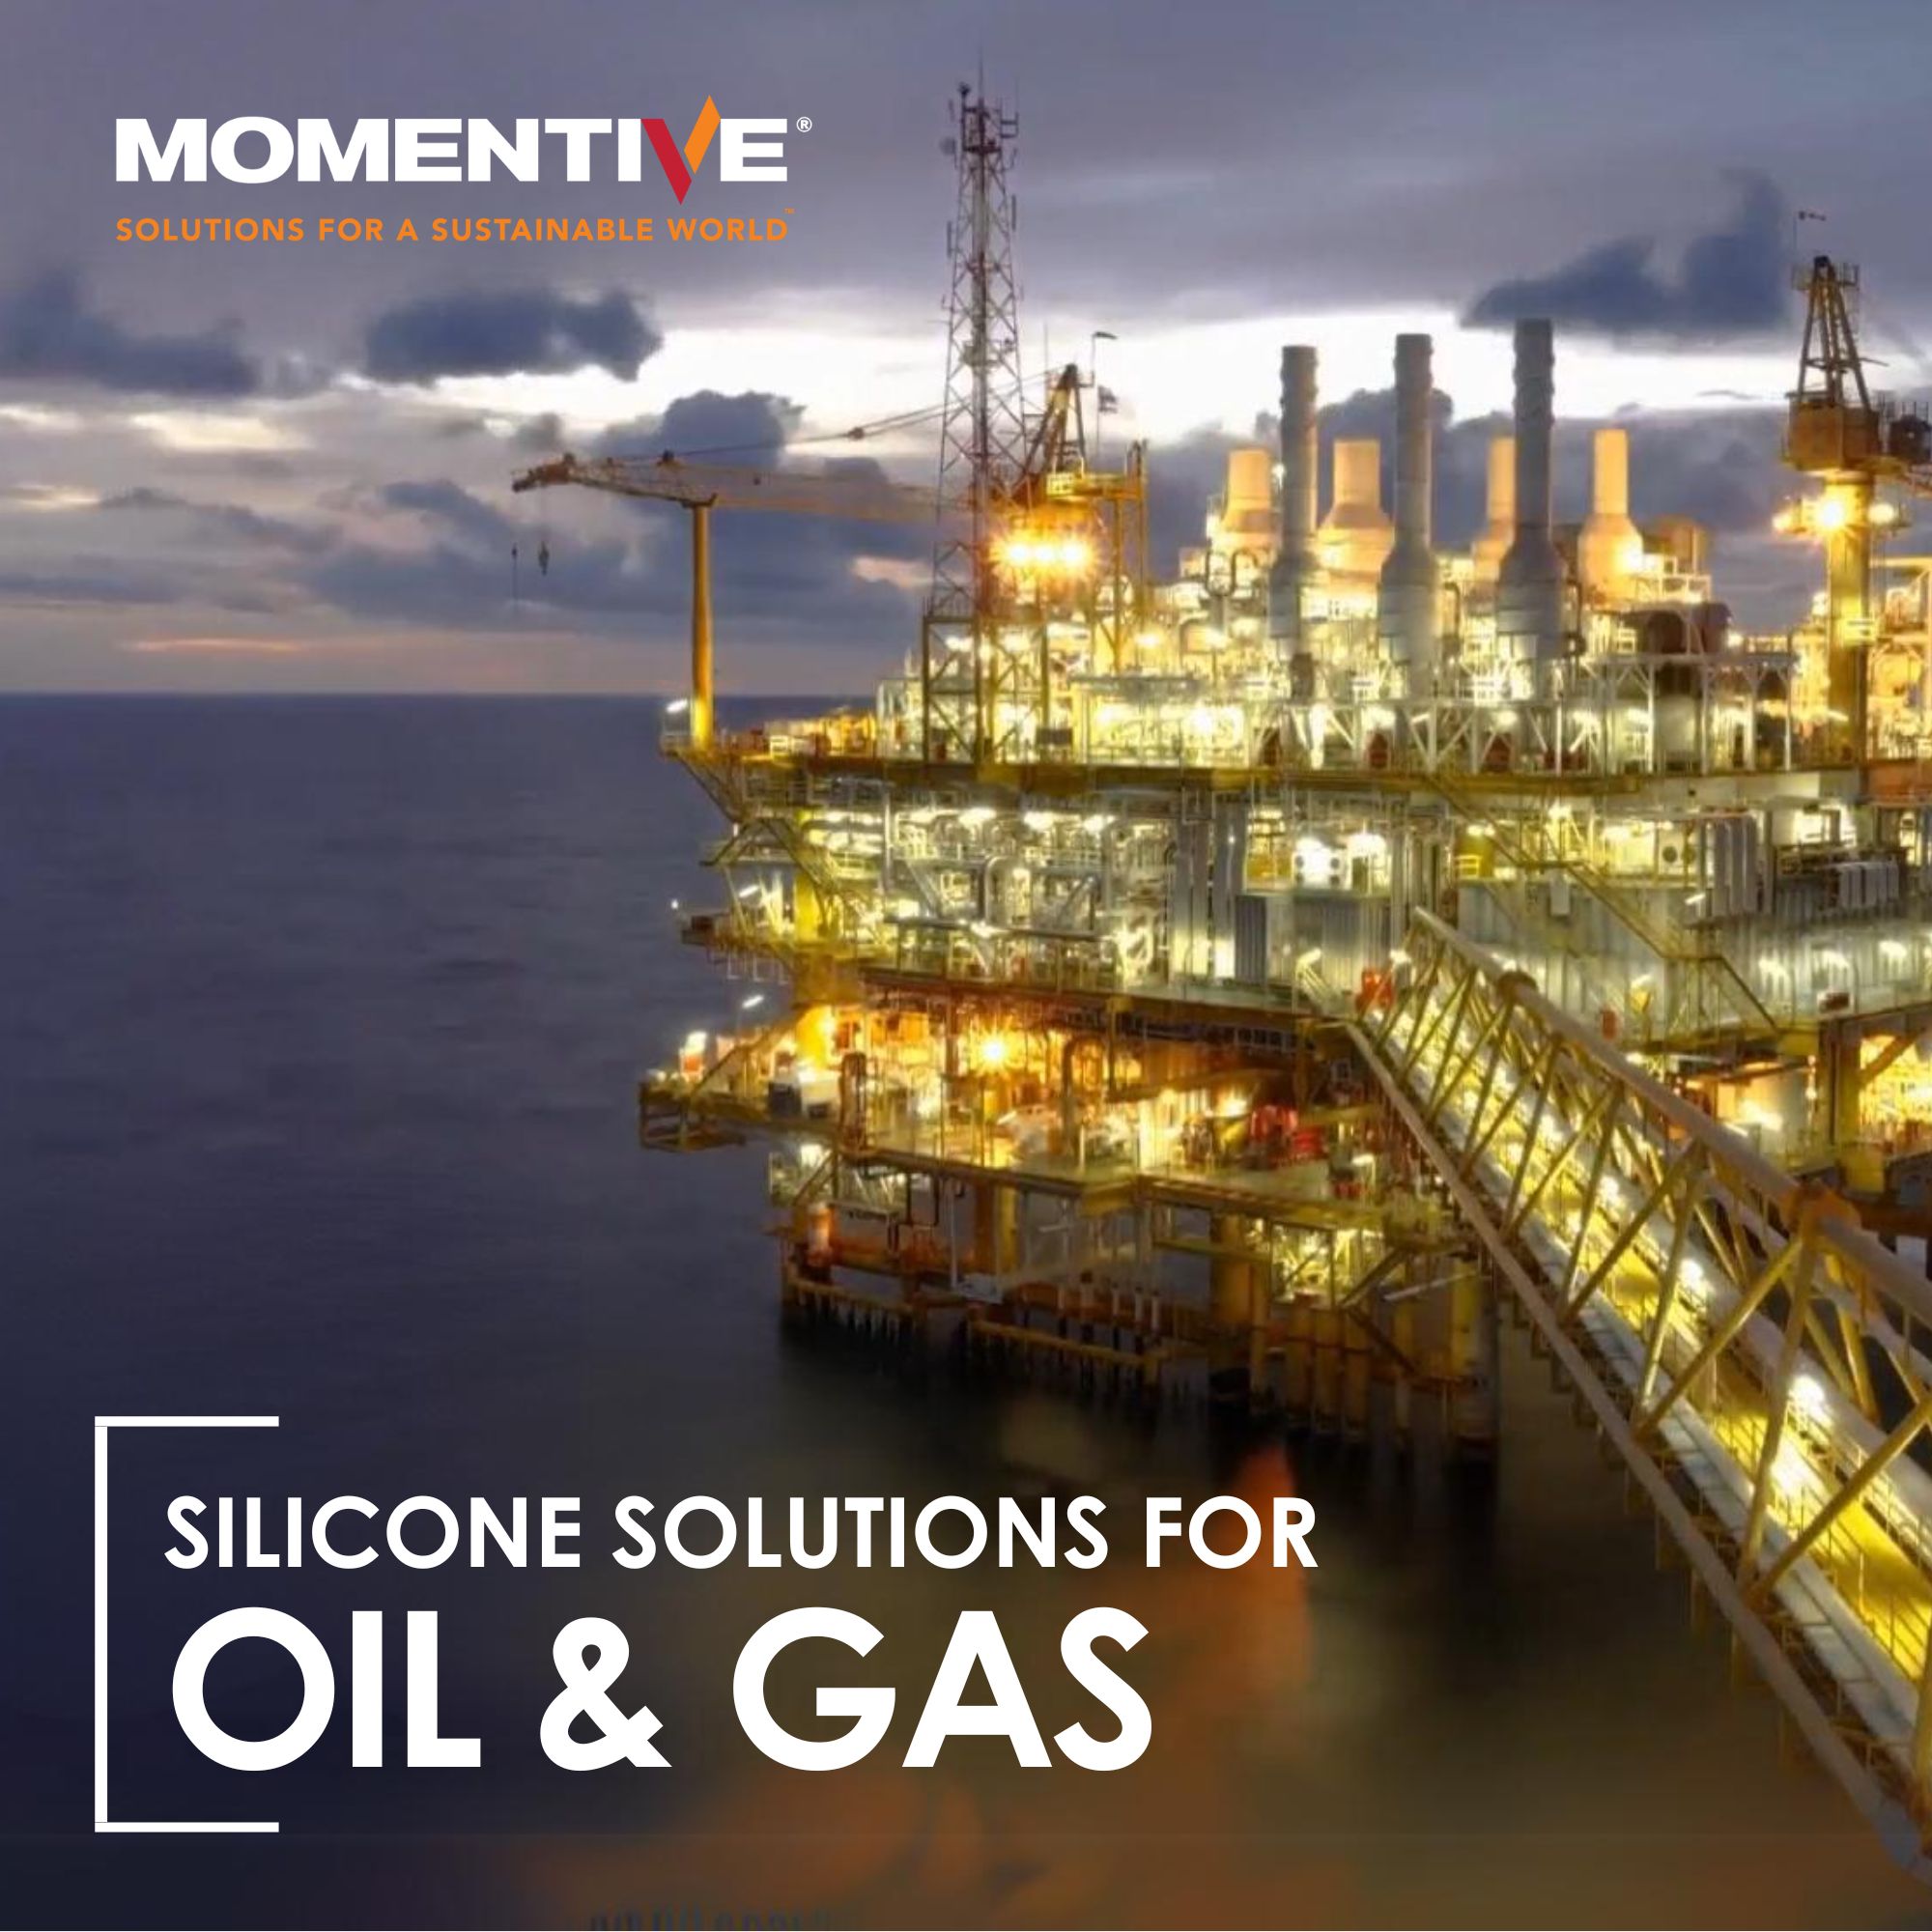 SILICONE SOLUTIONS IMAGE O&G